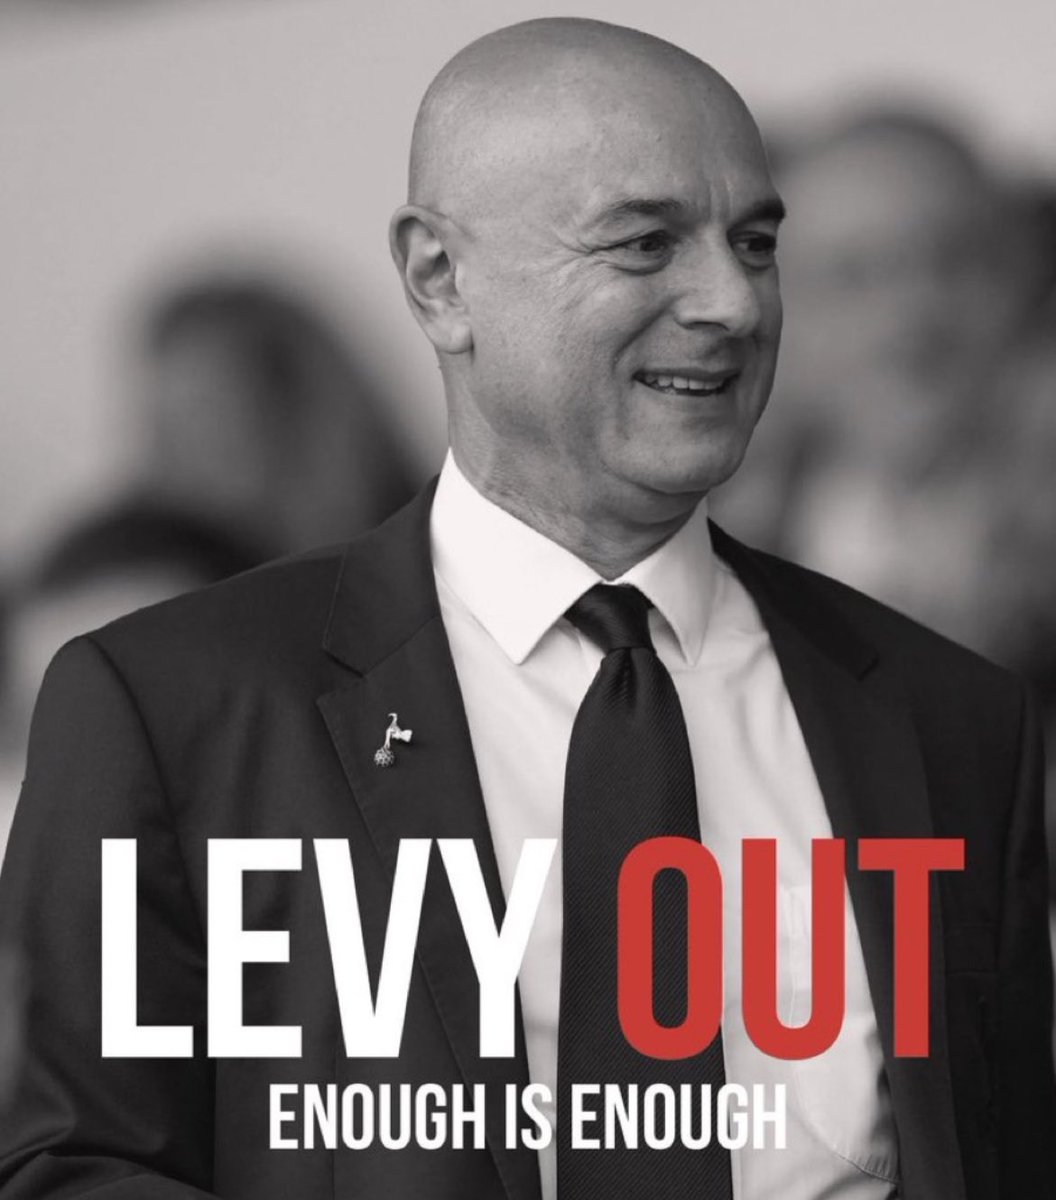 @SpursOfficial Show Levy these pictures to show him what winning trophies looks like 👍🏻 

#LevyOut

#ENICOUT